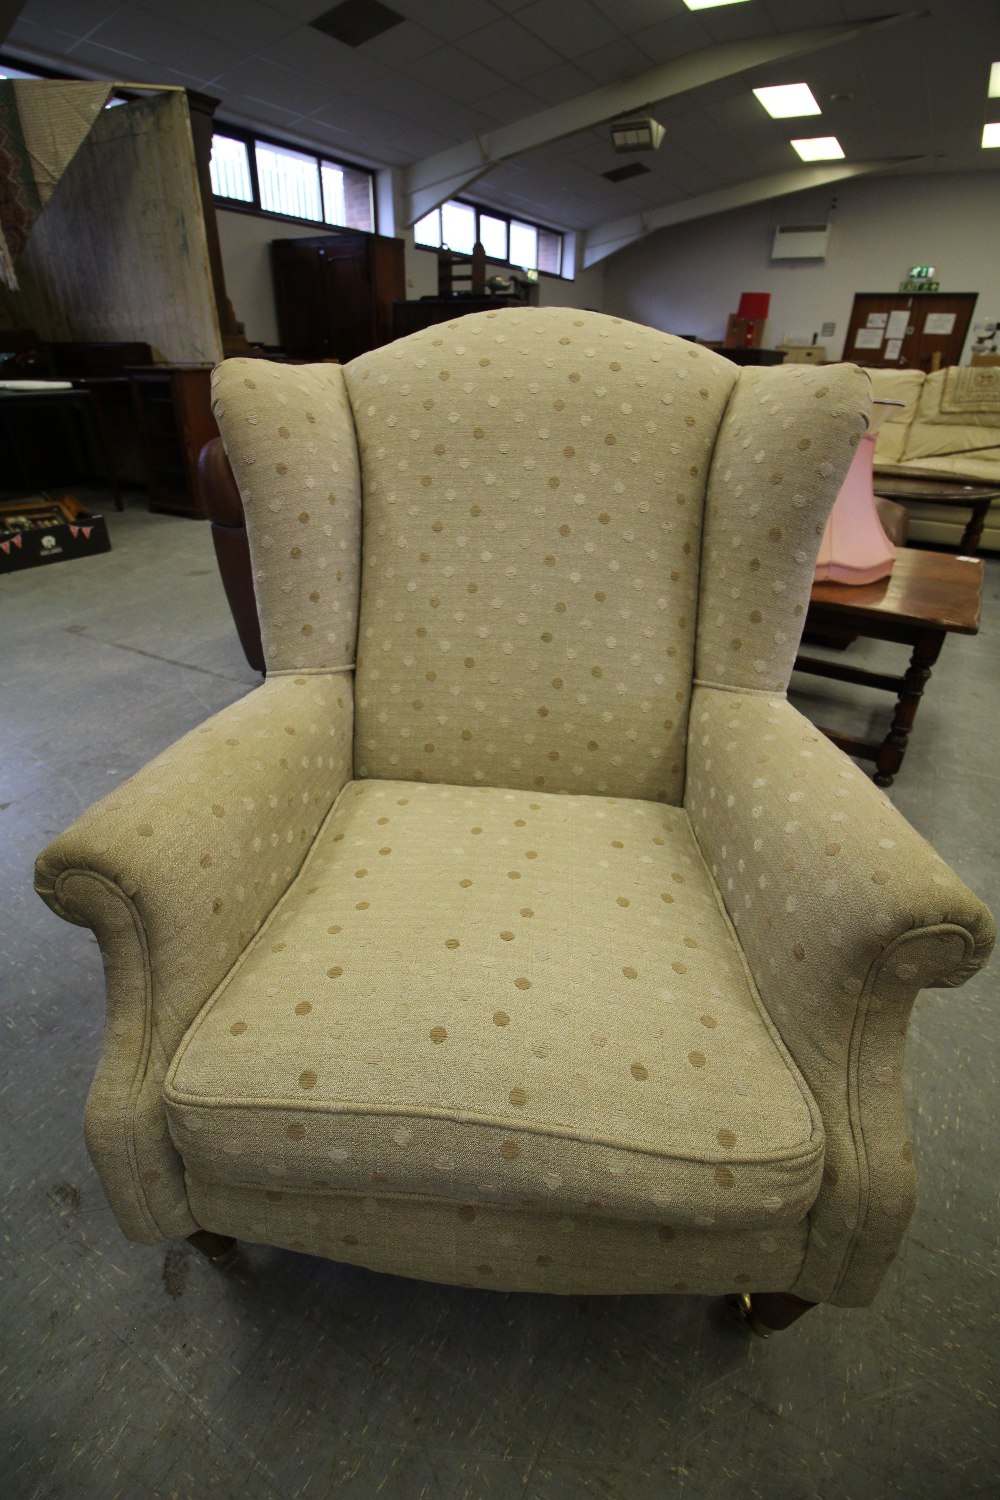 Winged Armchair with polka dot patterned upholstery